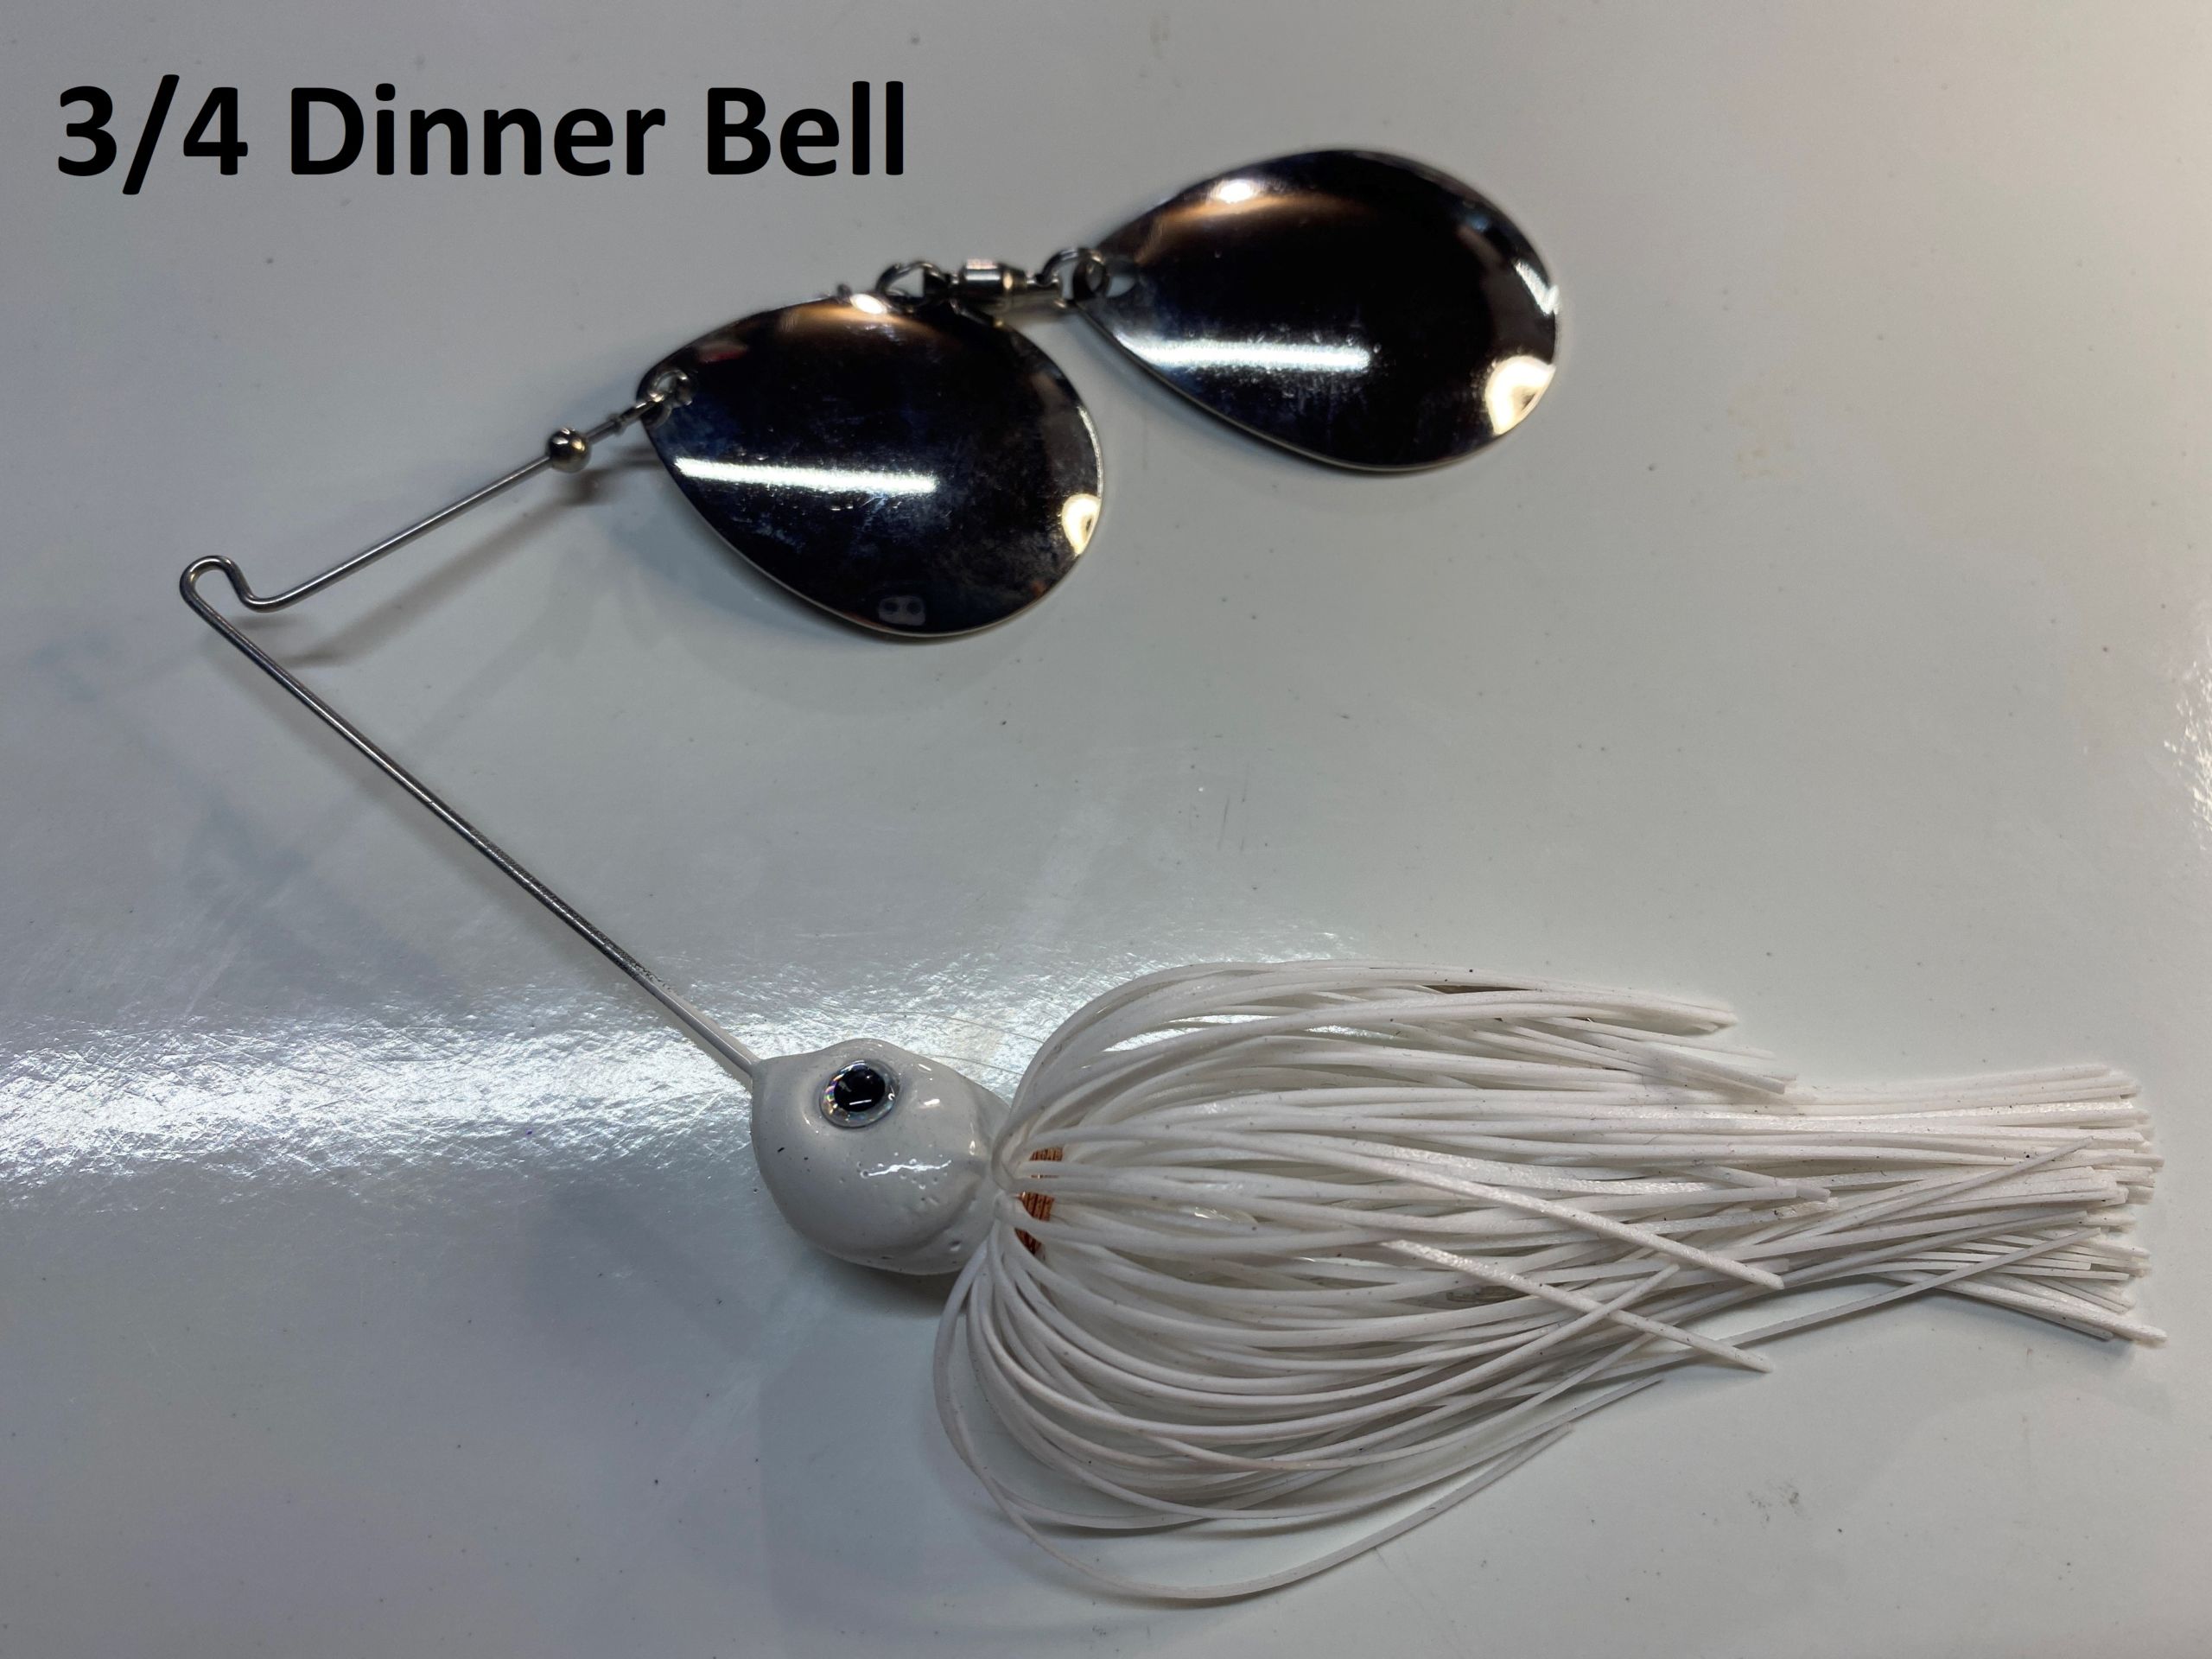 3/4 Dinner Bell – Adrenaline Tackle Company 217-502-6880